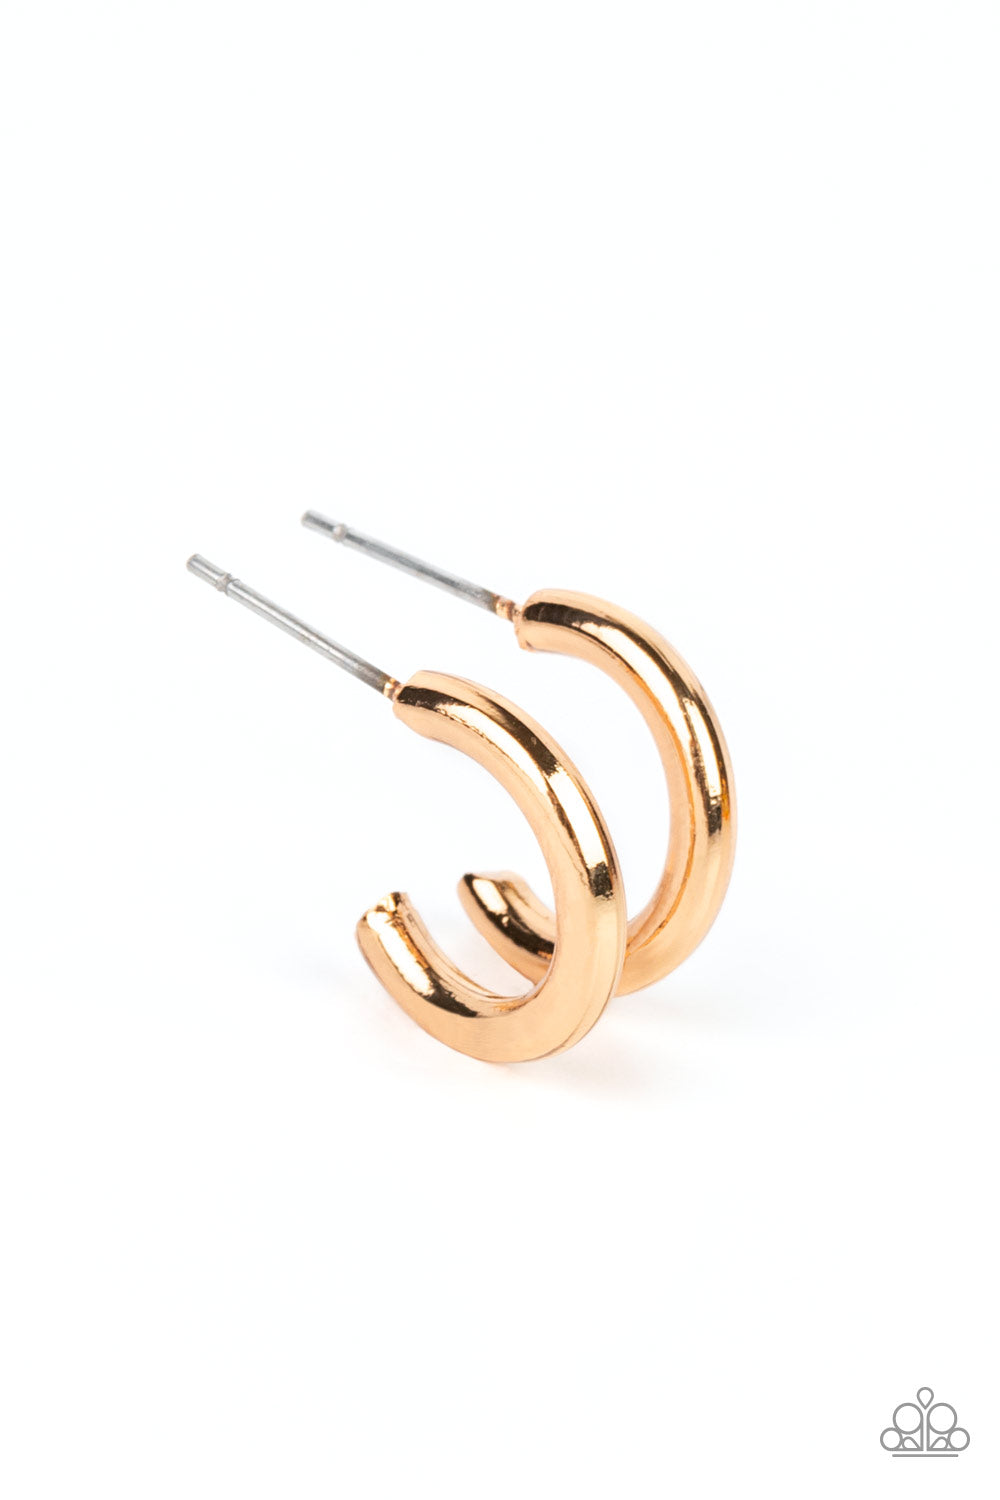 Small-Scale Shimmer Gold Earring